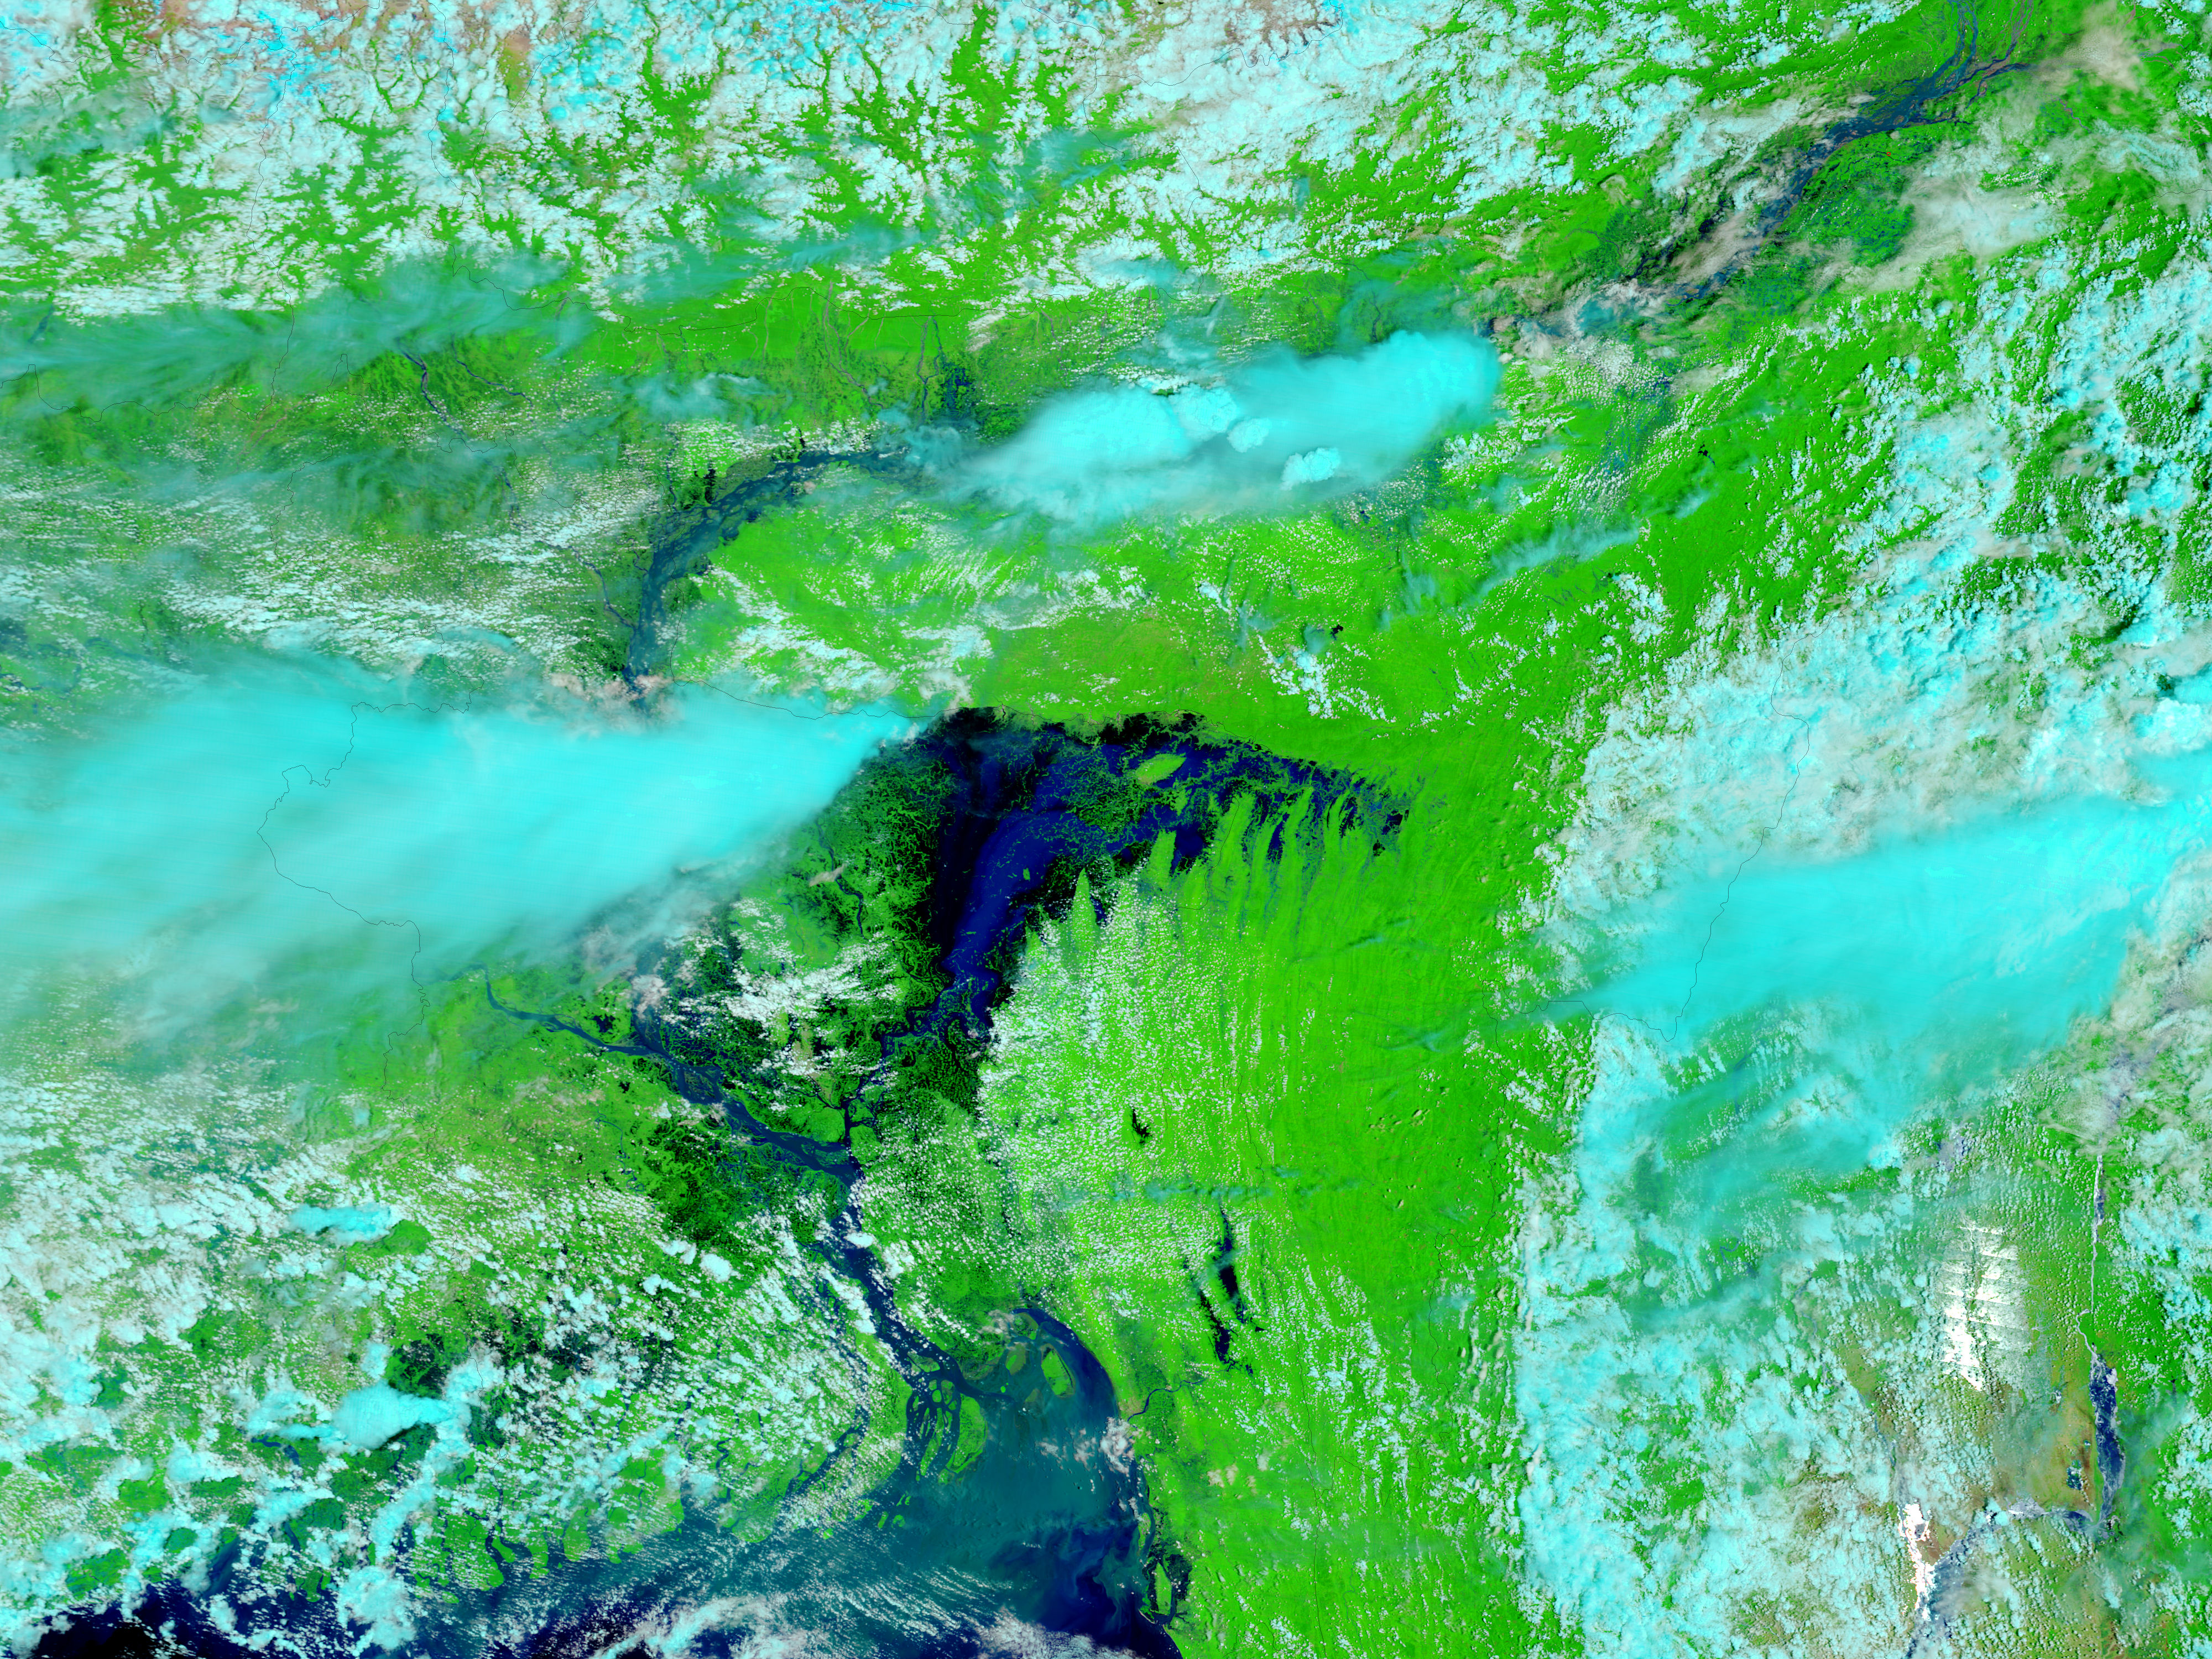 Floods in India and Bangladesh - related image preview